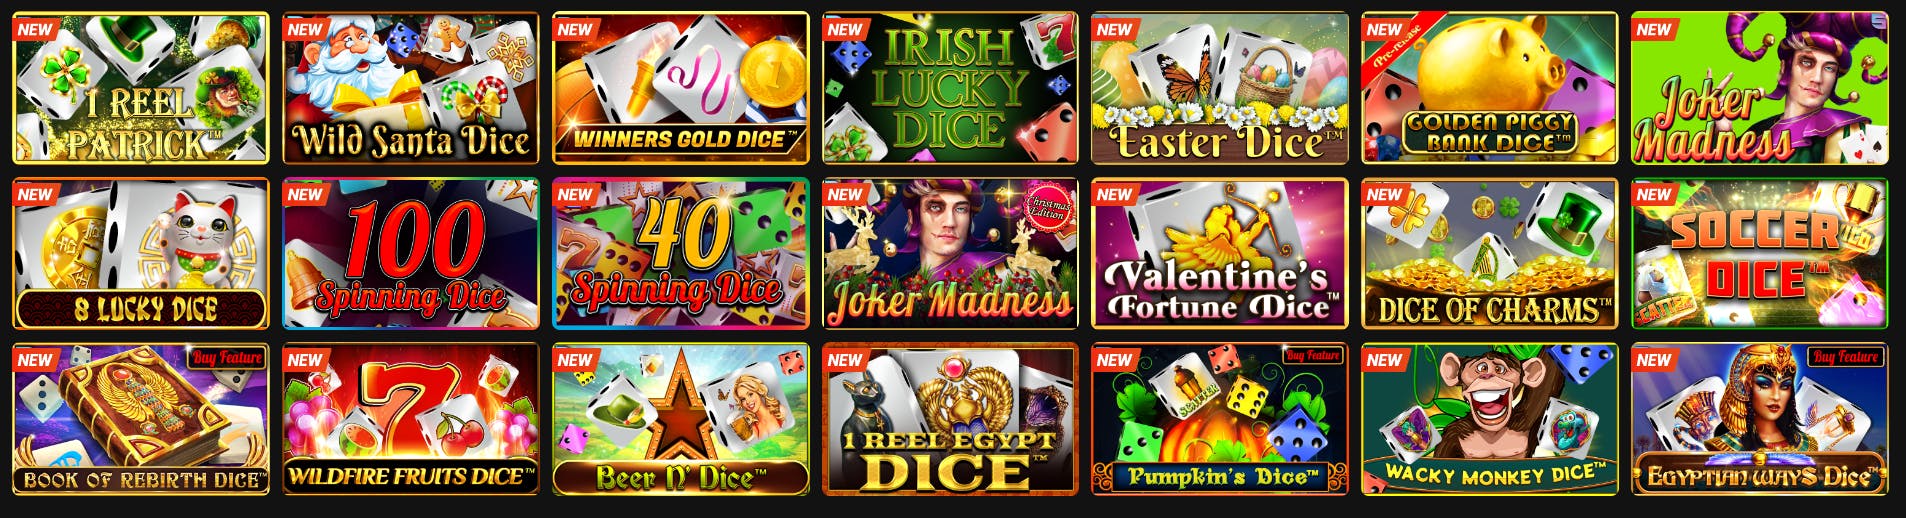 All Spinomenal games available on Lucky Games